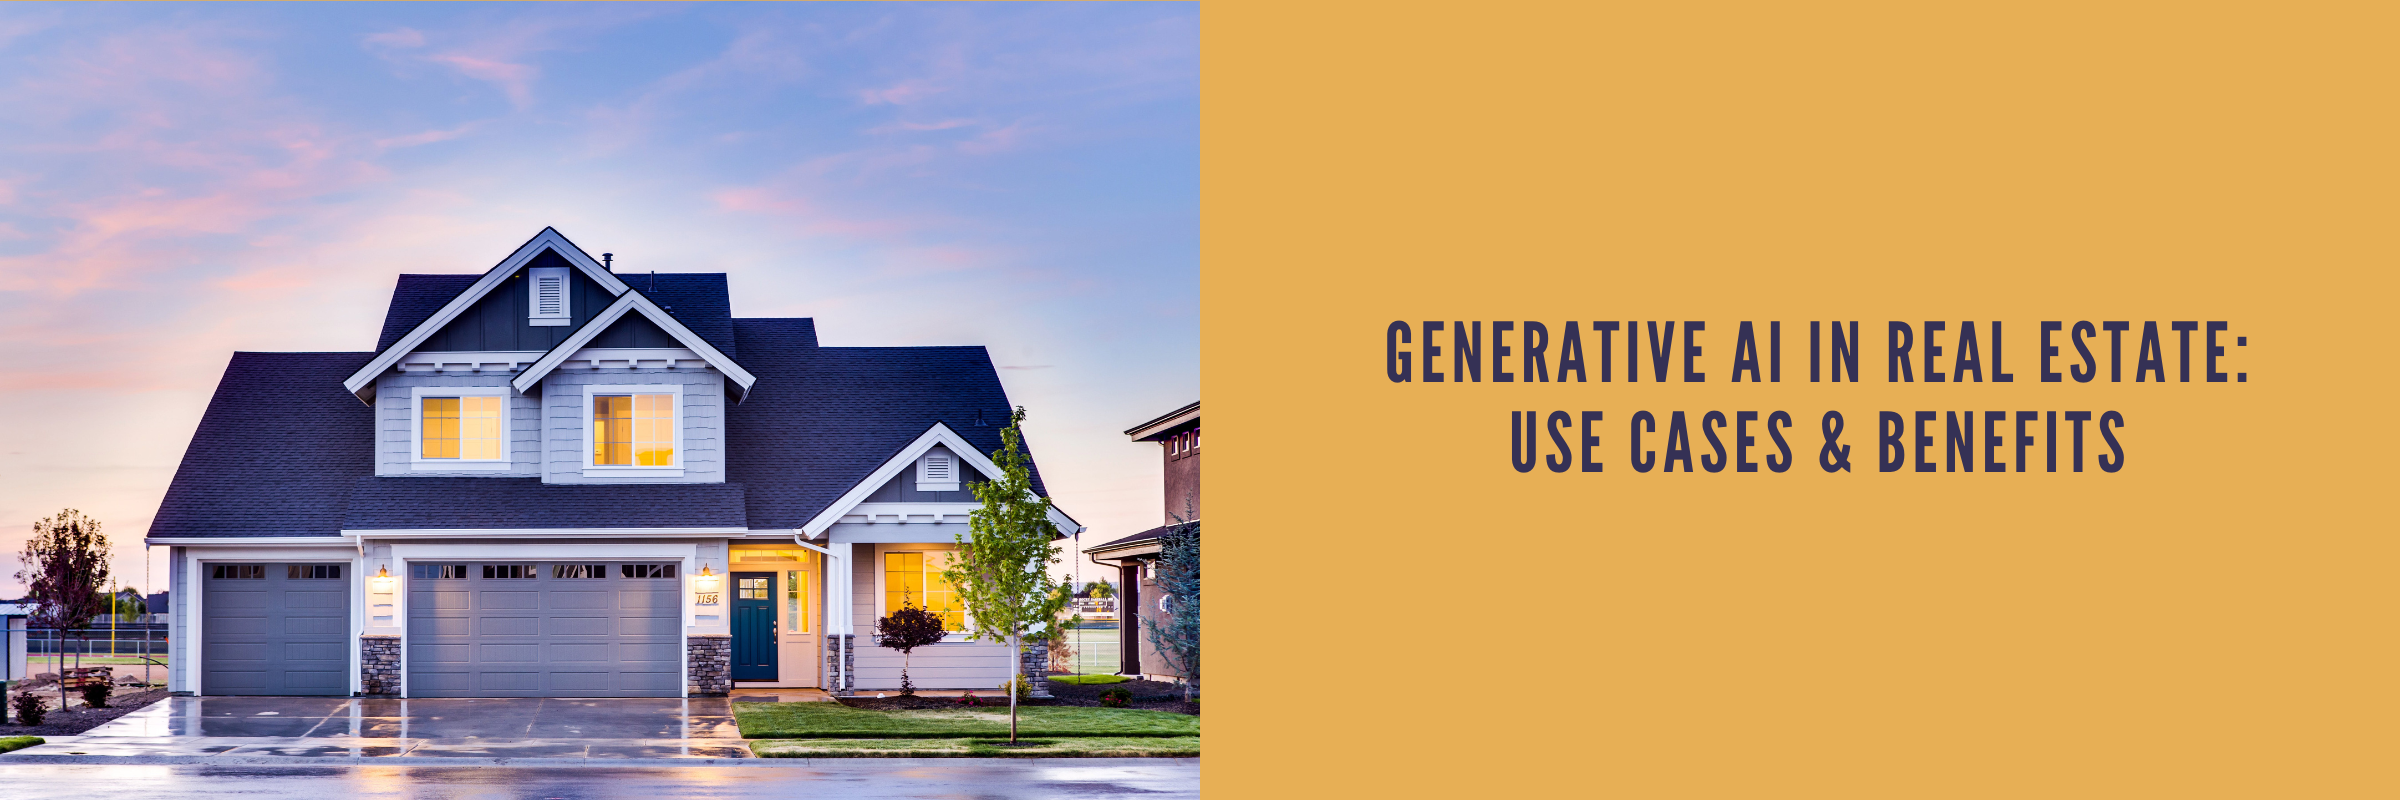 Generative AI in Real Estate: Use Cases & Benefits